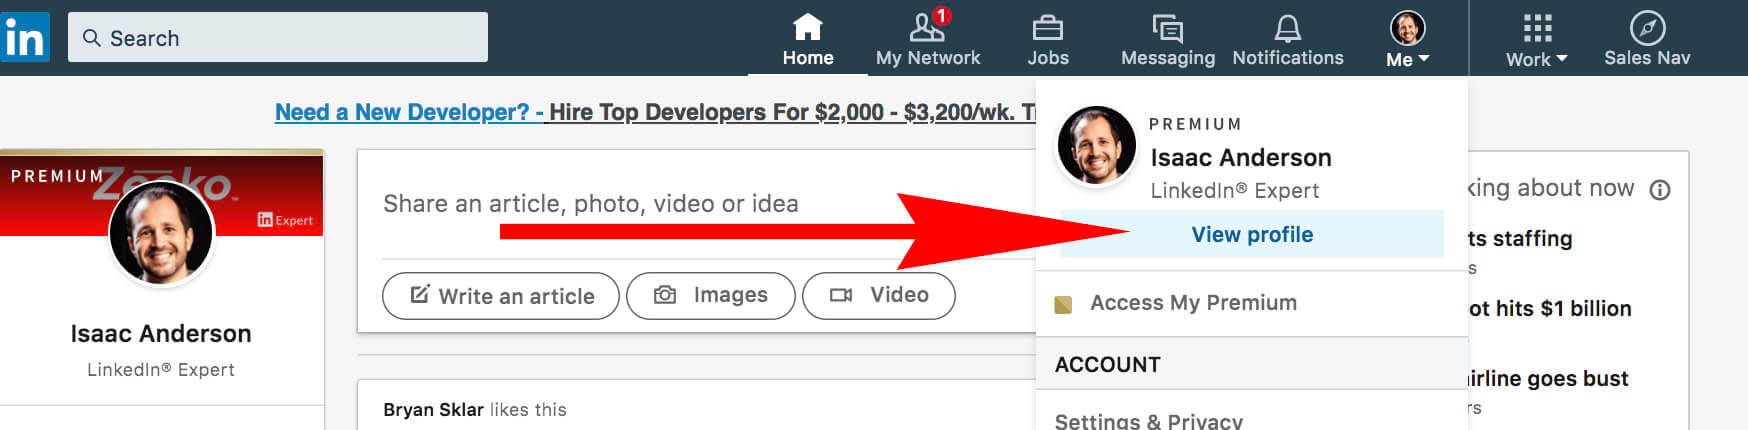 How to update and remove interests on Linkedin - view profile